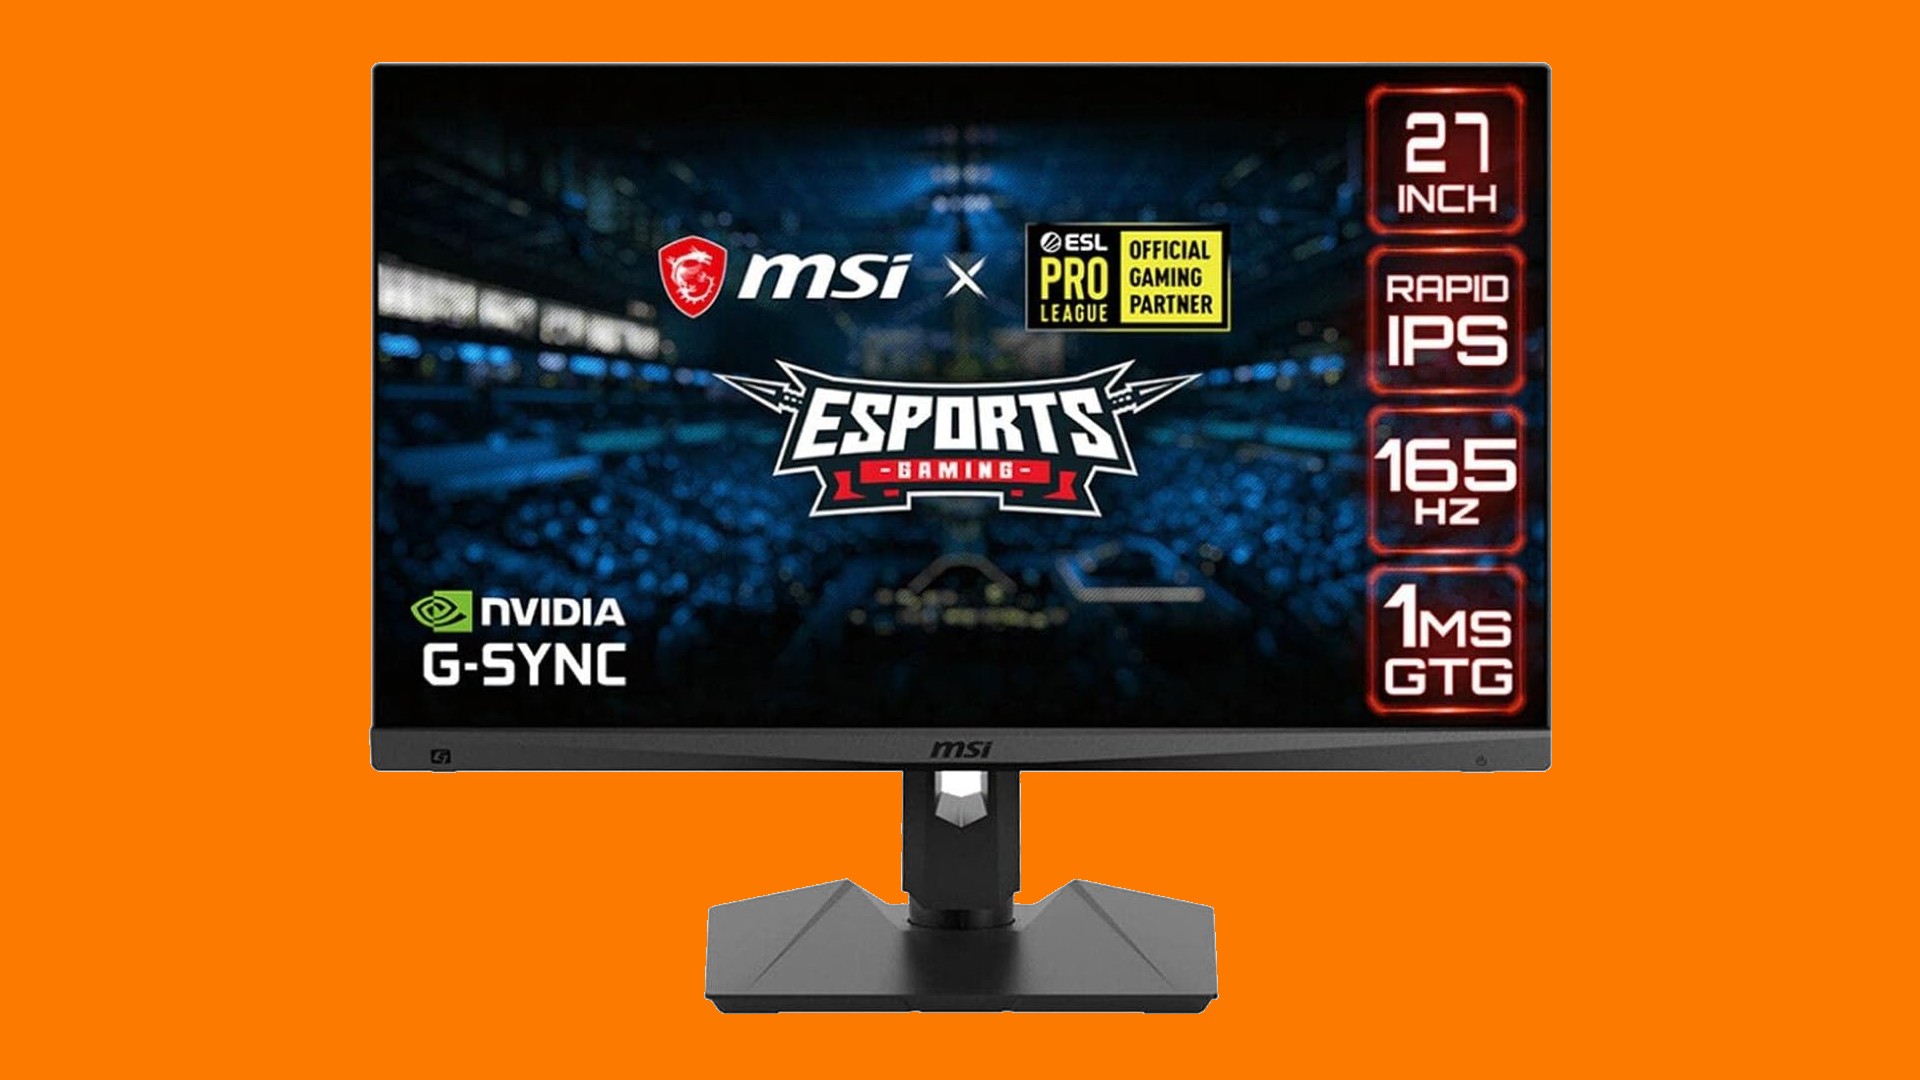 Save over $100 on this esports monitor in Cyber Monday deal